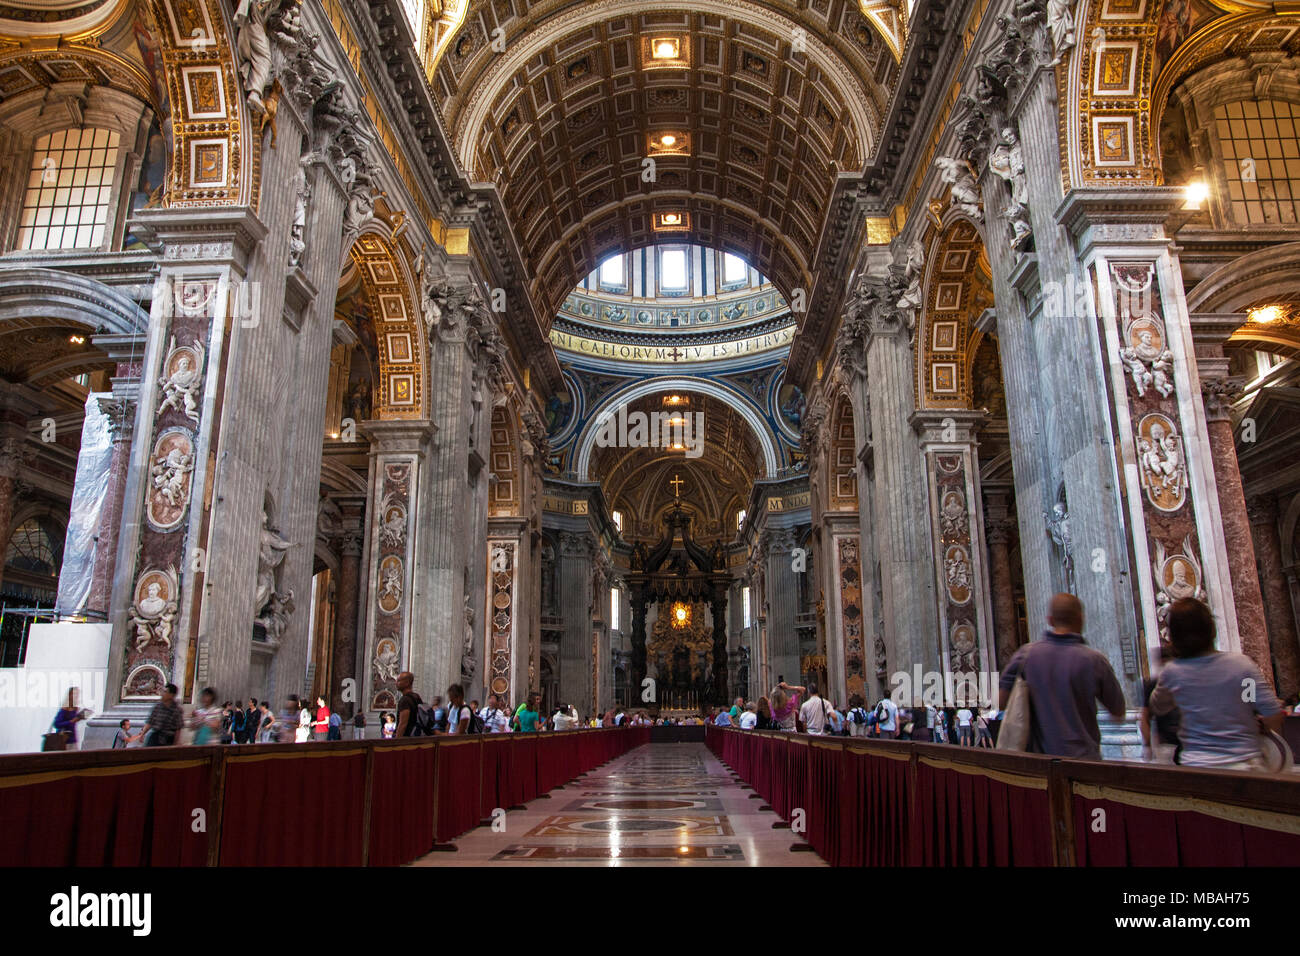 ROME,ITALY - JUNE 17,2011: Interior of Saint Peter's Basilica (San Pietro) in Rome, Italy. Historical architecture of Vatican and Rome. St. Peter's Ba Stock Photo